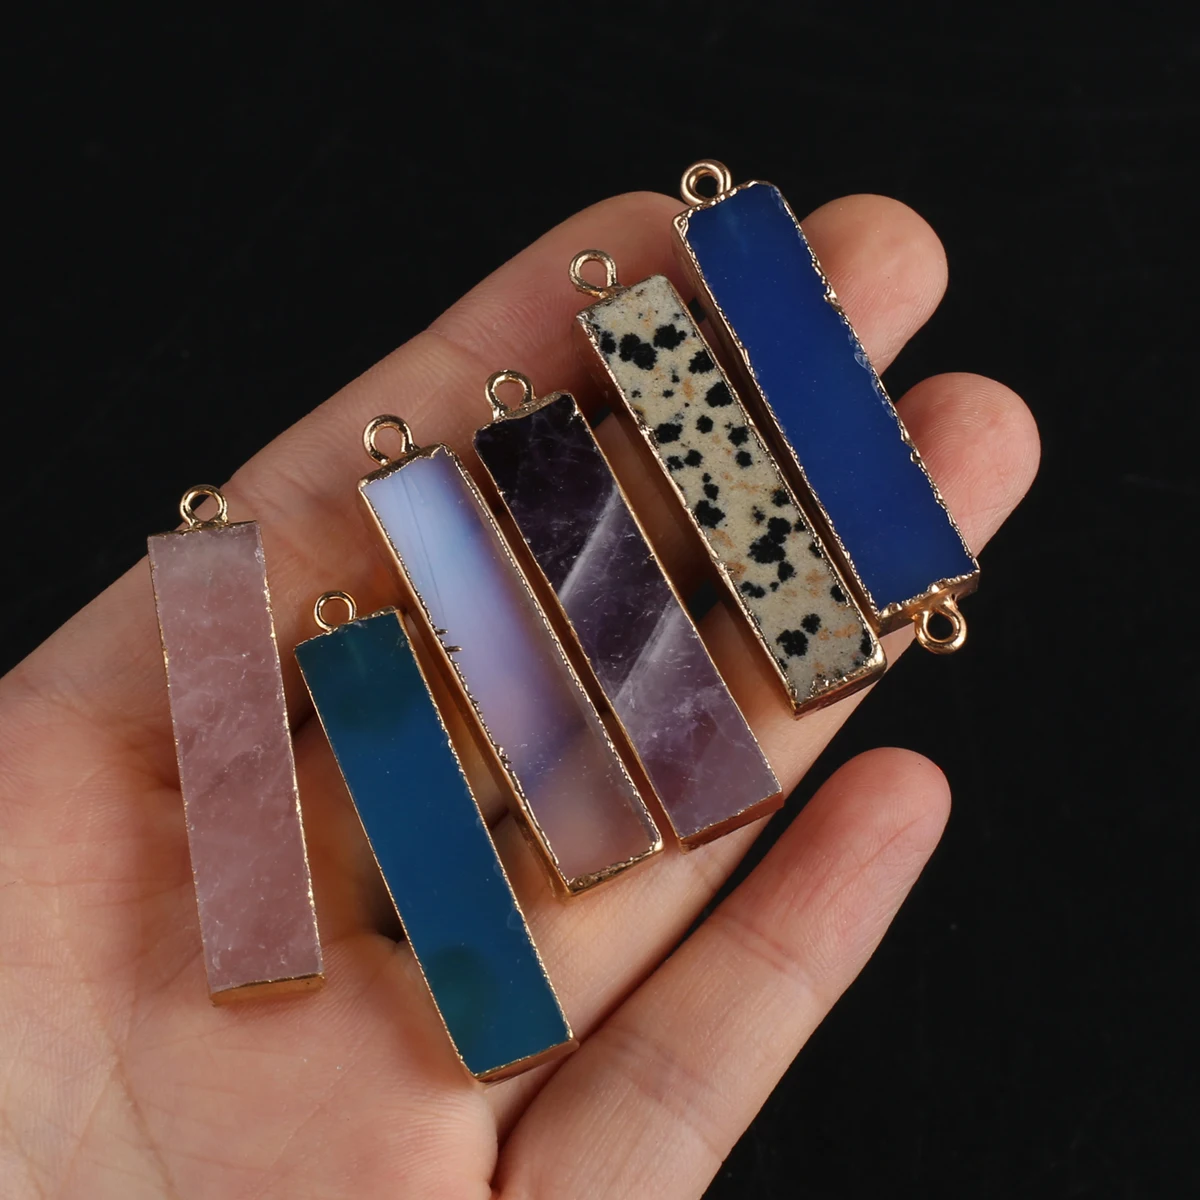 

10PCS Wholesale Randomly Mixed Natural Amethysts Opal Rectangle Pendant Jewelry Making DIY Necklace Earrings Accessories Gift